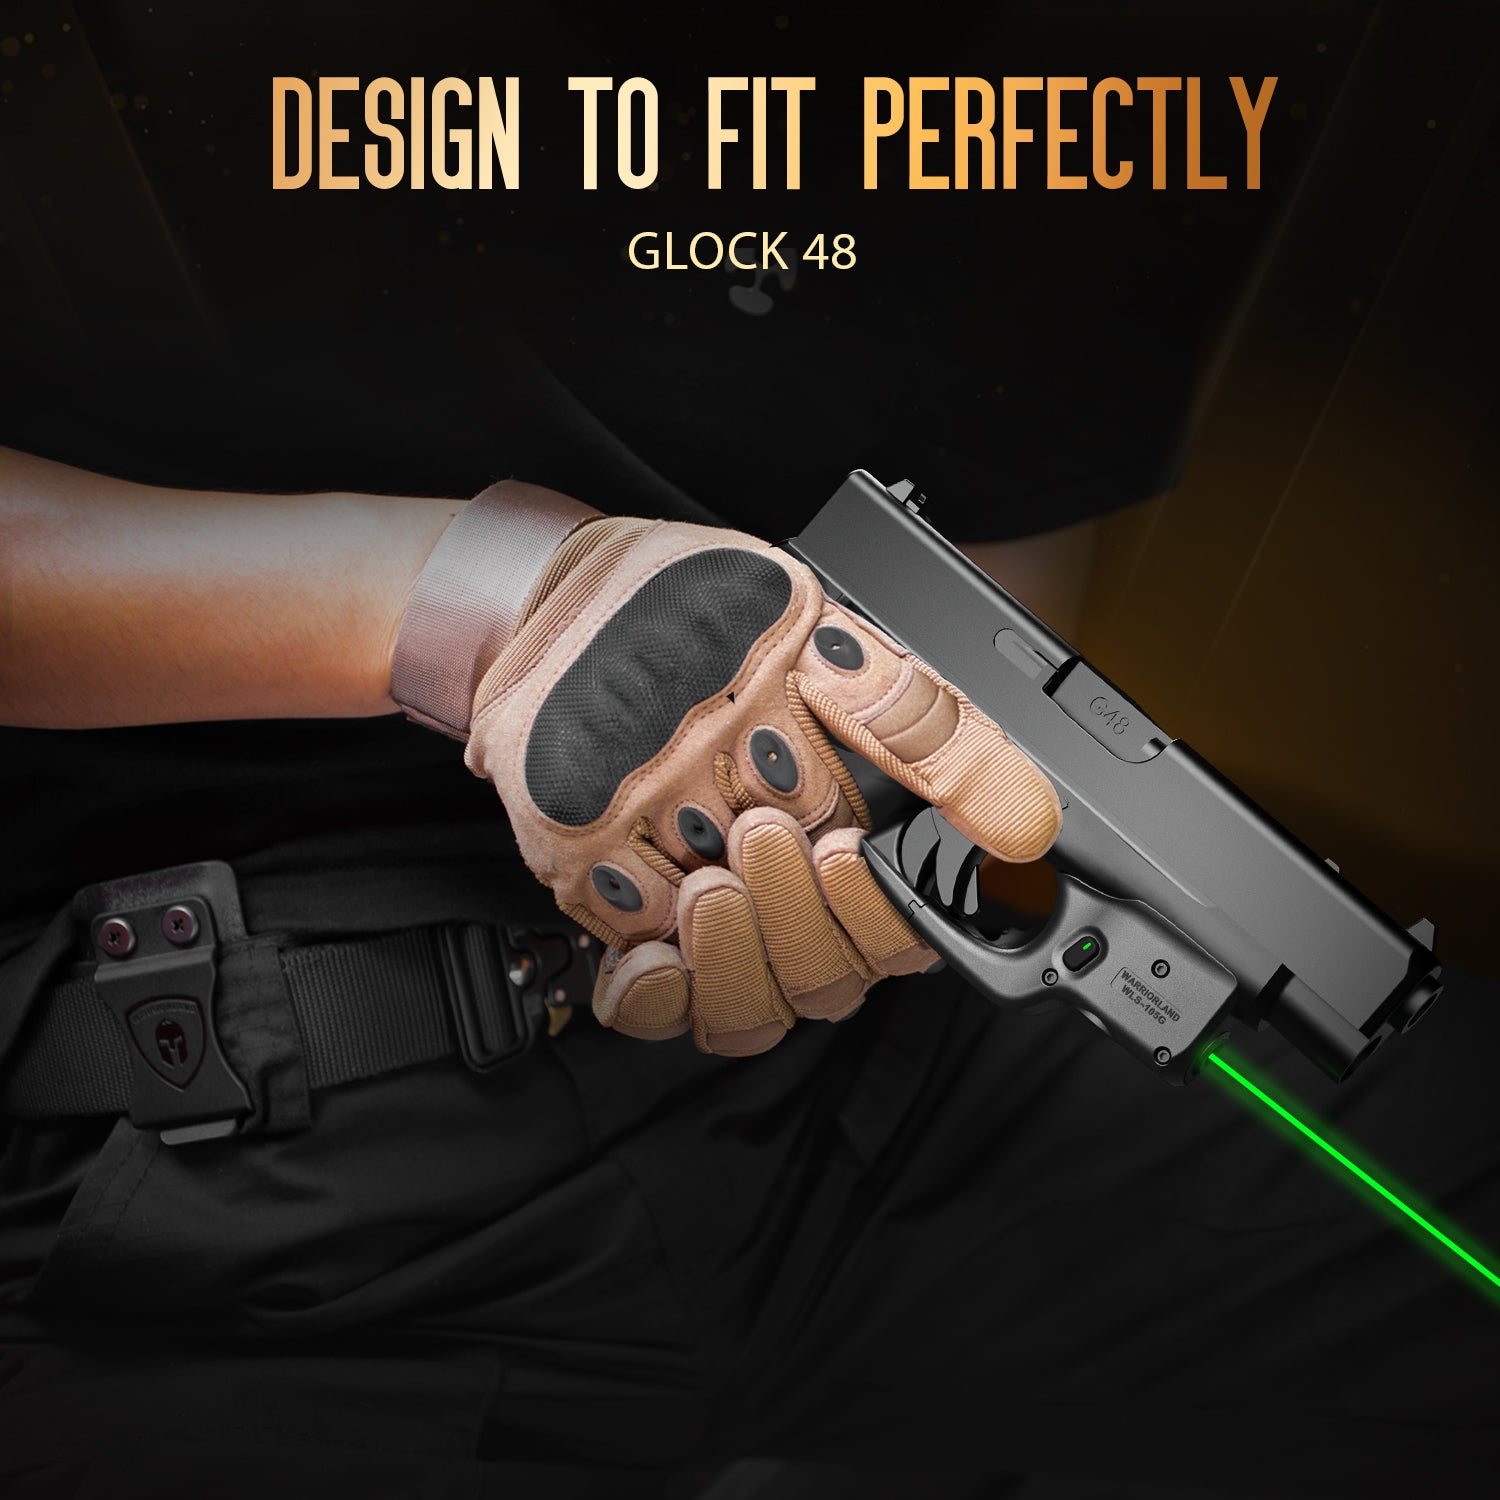 Green Laser Sight Designed to Fit Glock 48 with Holster Combo, Green Beam Sight with Power Indicator, Custom-Made IWB Kydex Holster Right Hand, WLS-105G w/ G48 Holster|WARRIORLAND